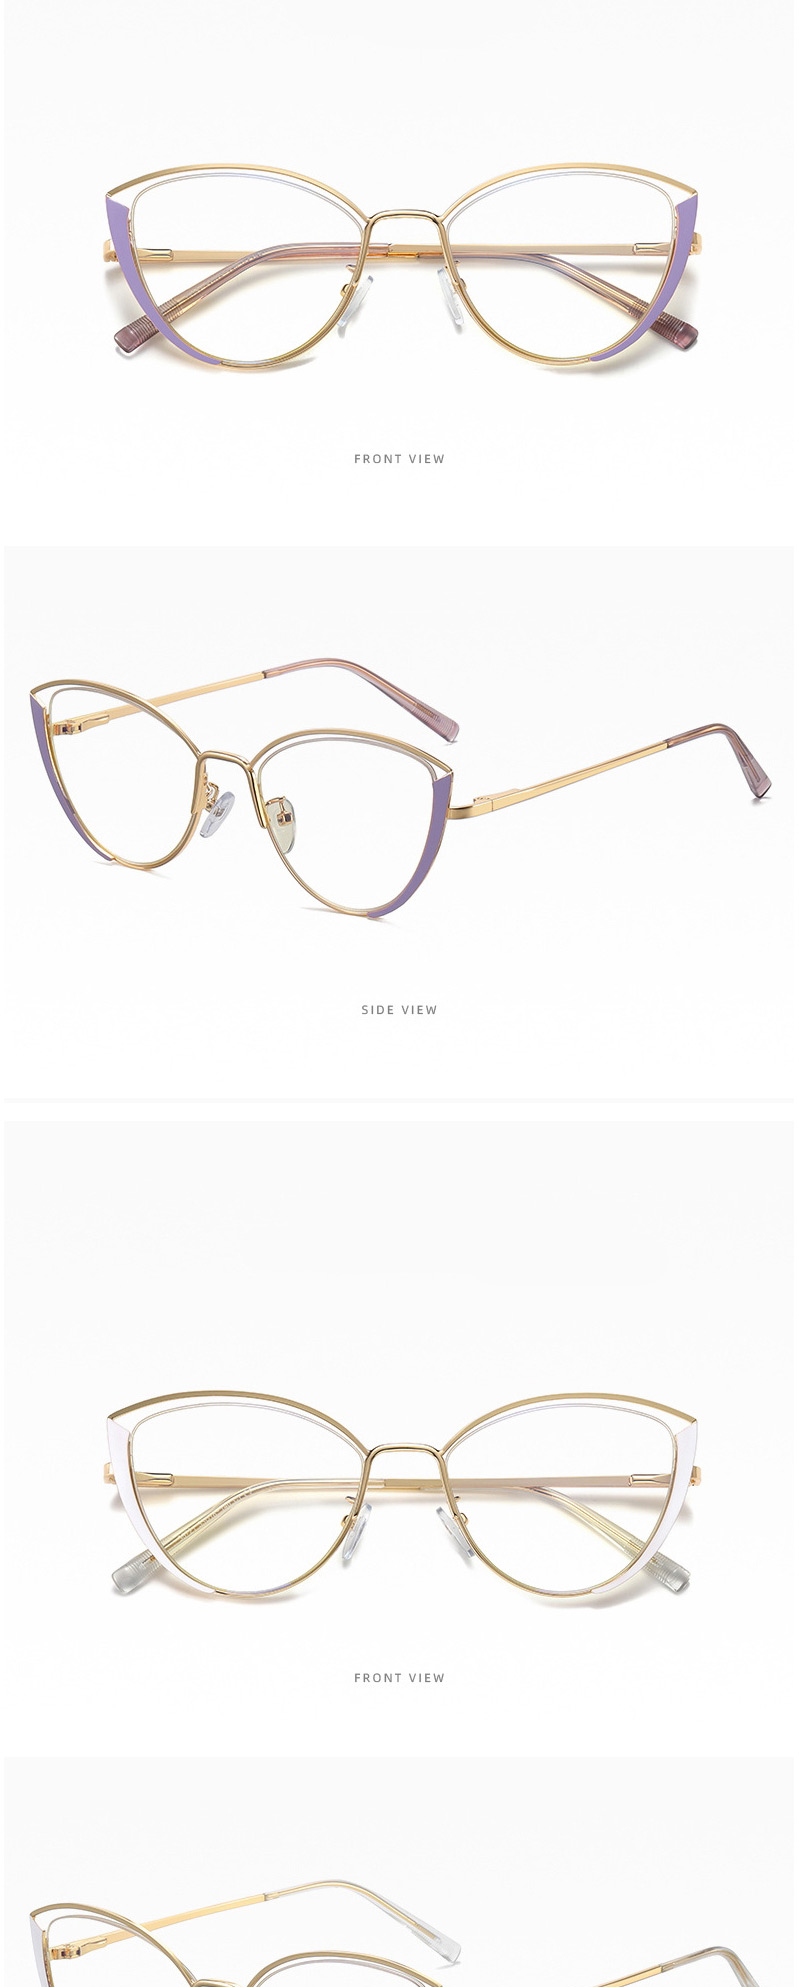 Fashion C7 Bean Paste/anti-blue Light Anti-blue Light Can Be Equipped With Myopia Metal Flat Mirror,Fashion Glasses